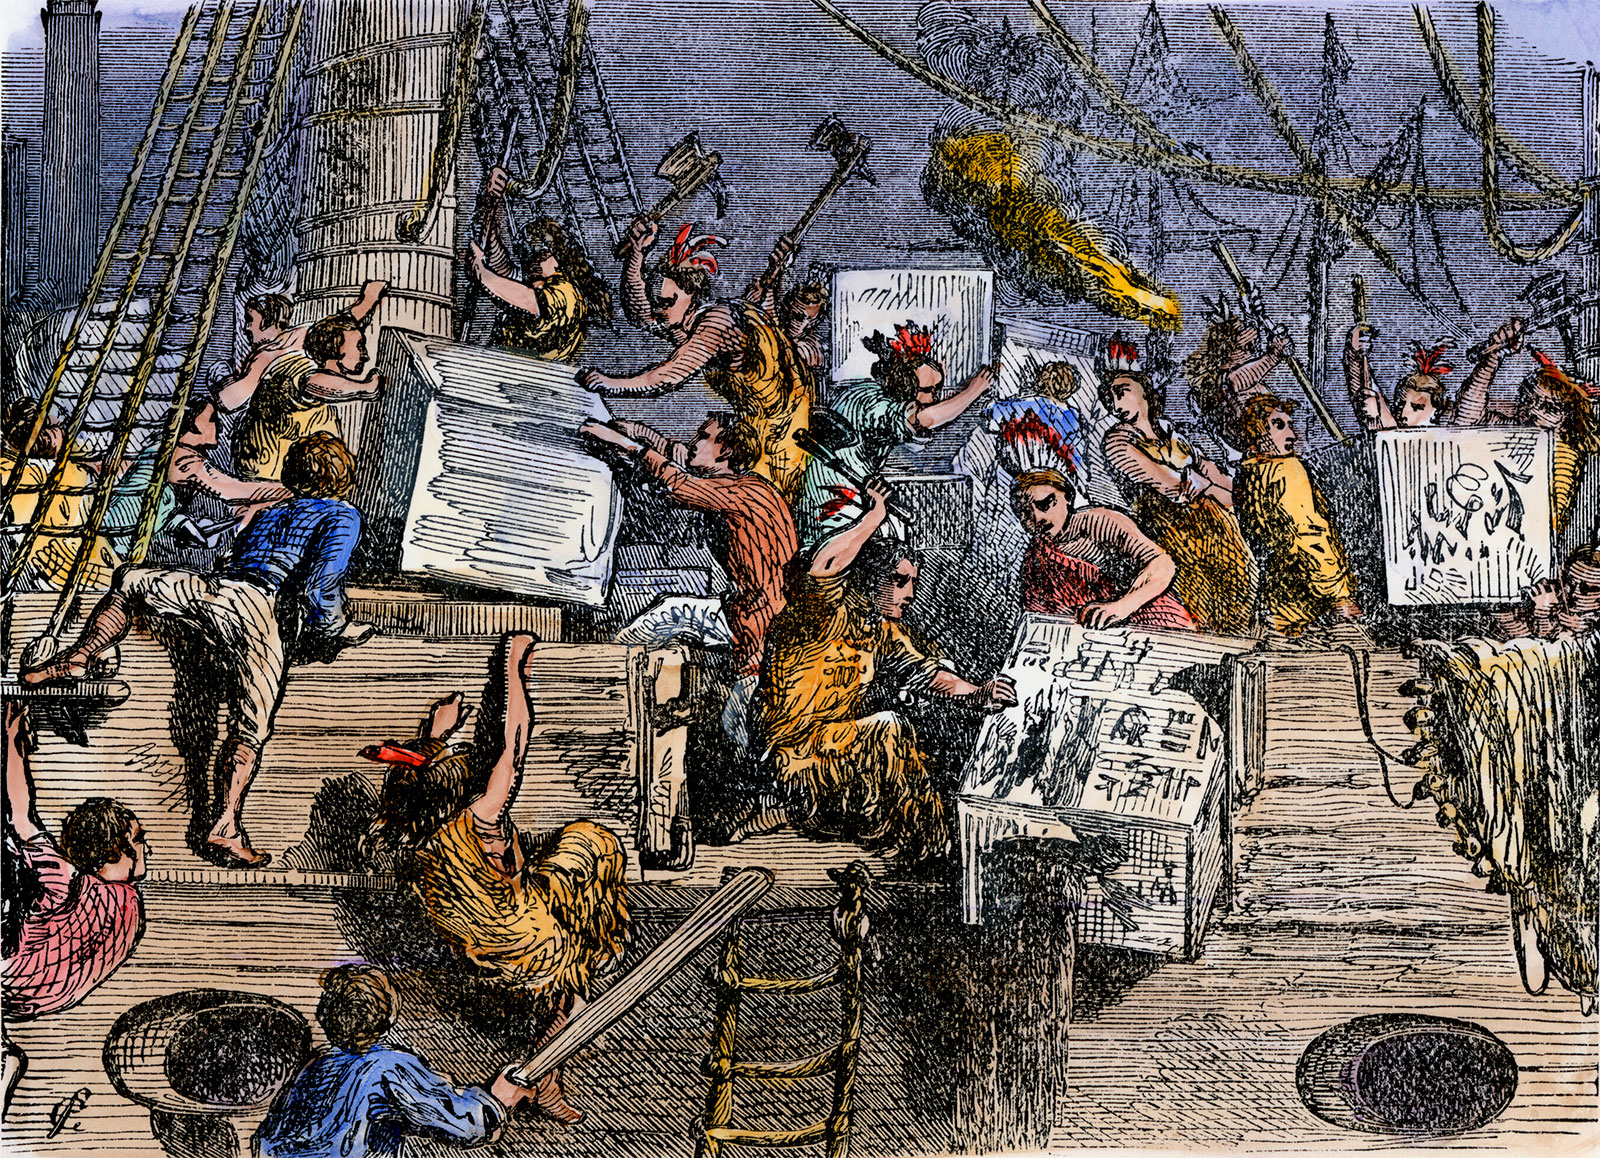 Let’s See If You Know Enough to Get 20/25 on This Mixed Knowledge Quiz Boston Tea Party Harbor Dec 16 1773